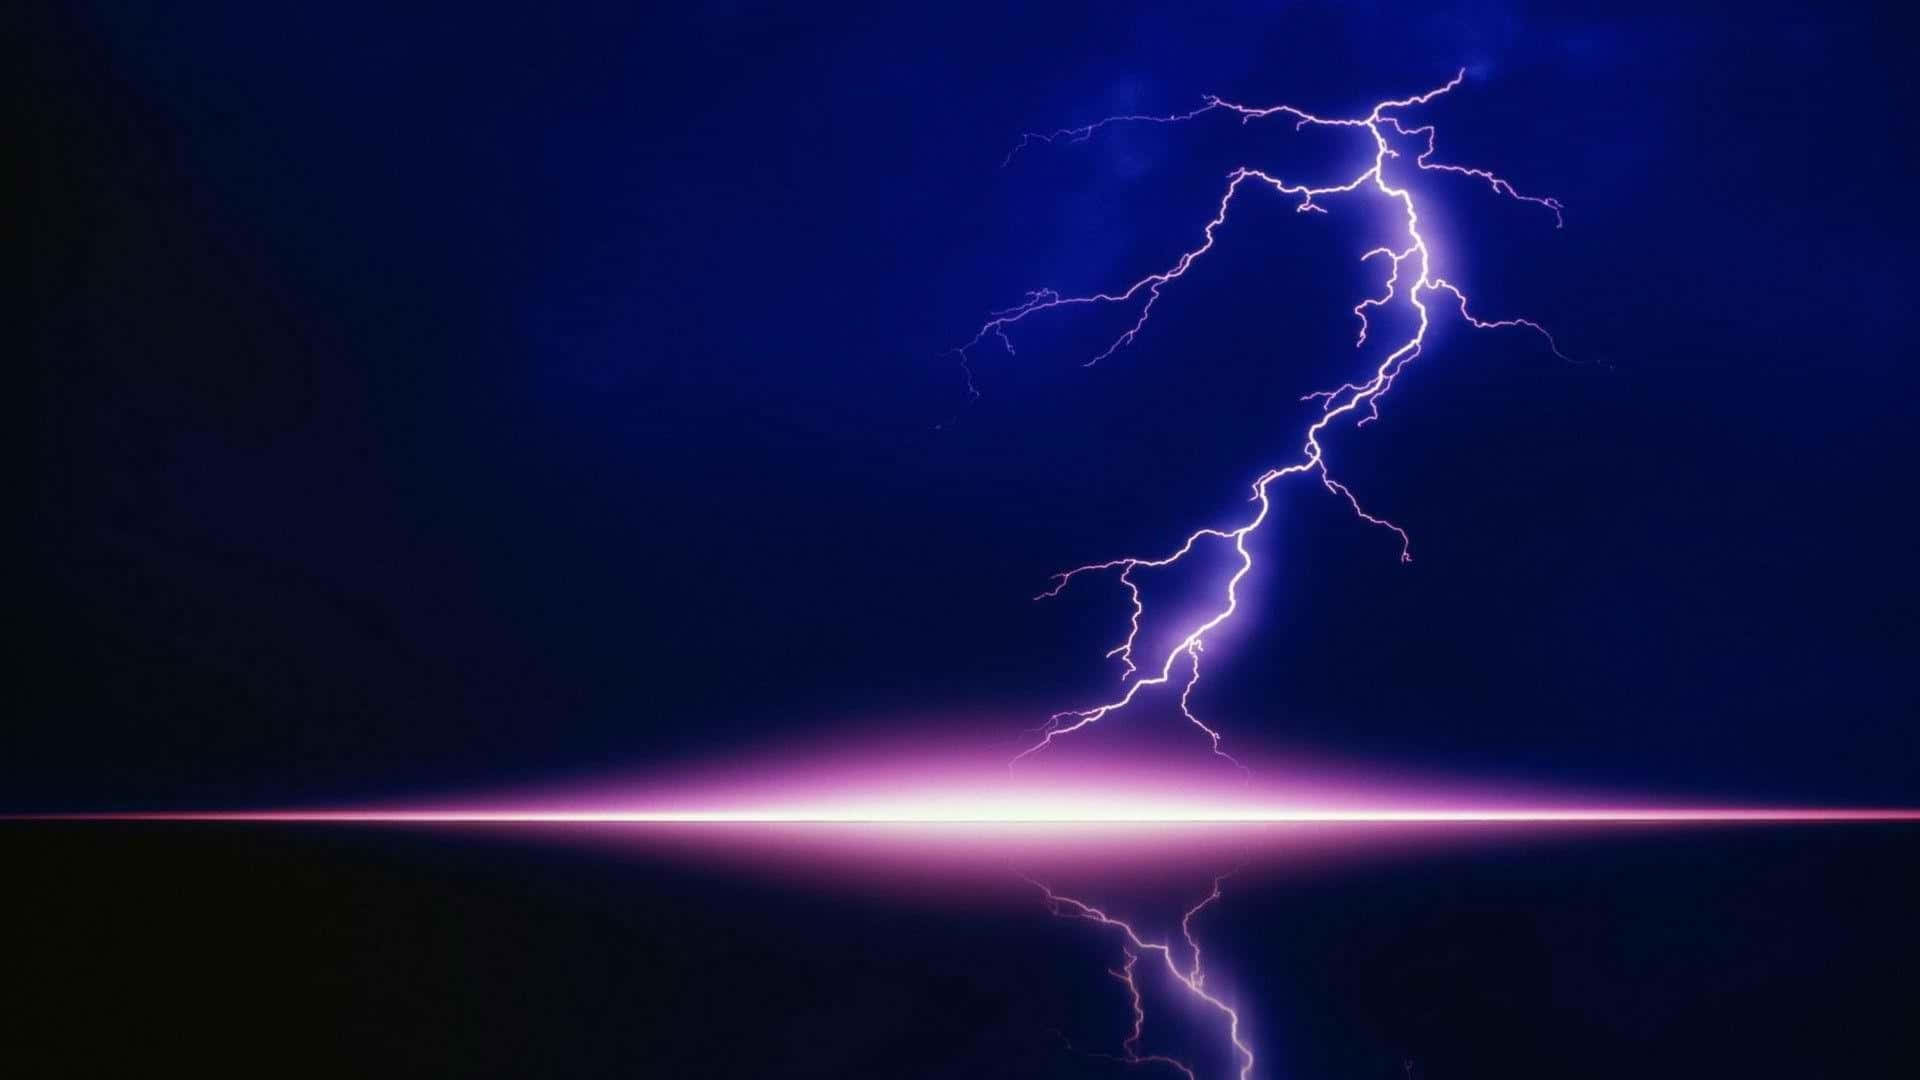 Witness The Majesty Of Blue Lightning In This Stunning Image.